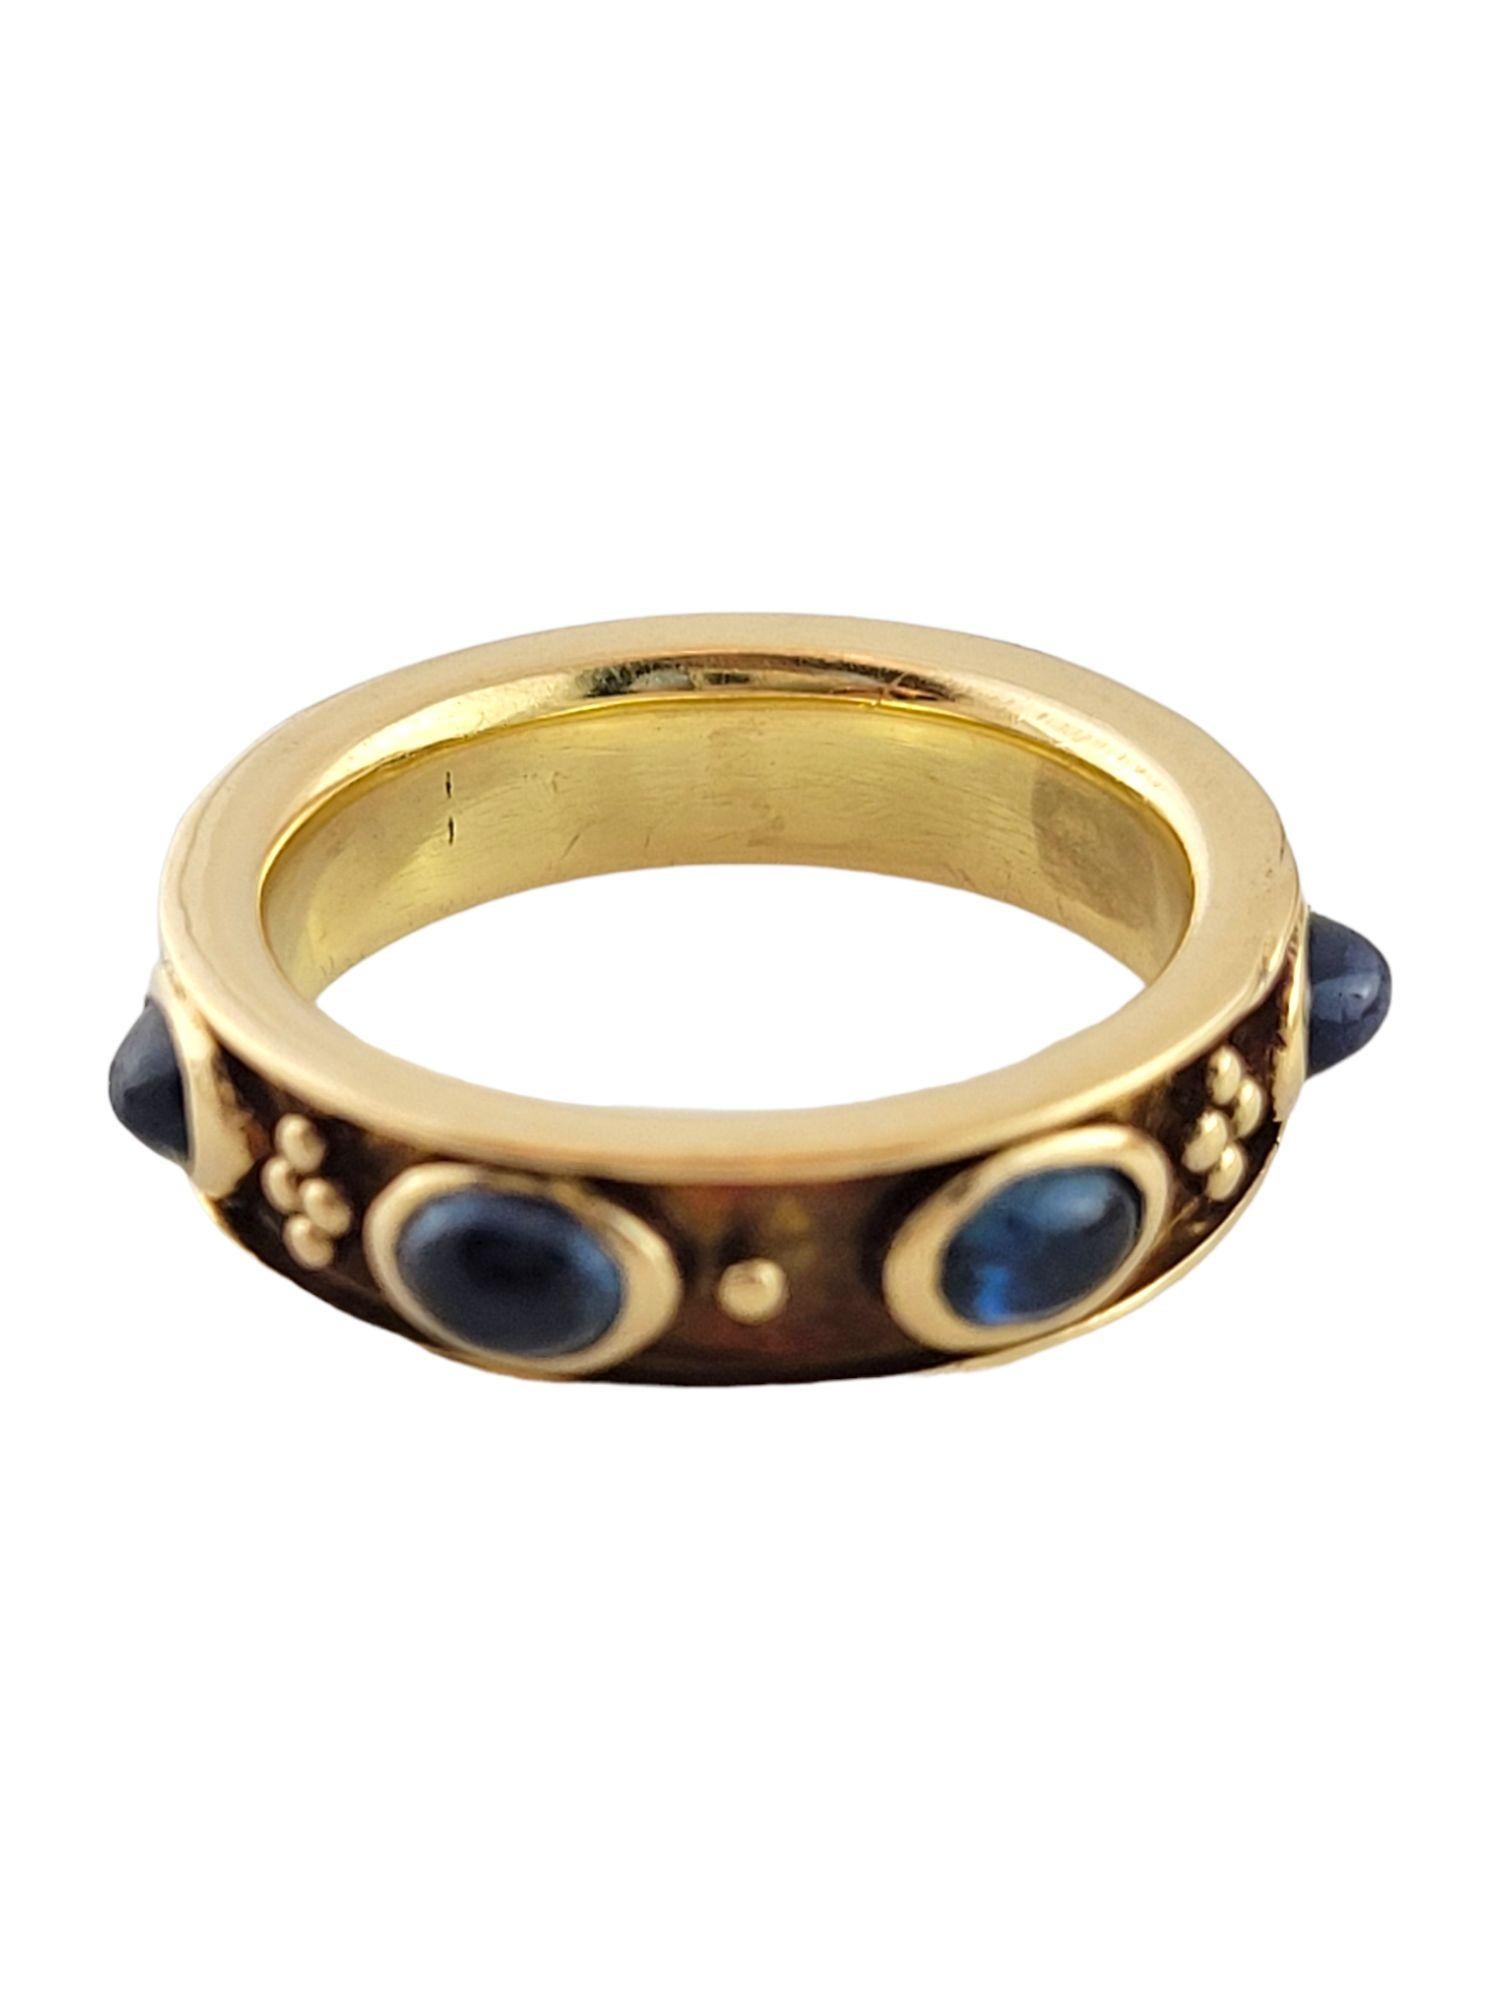 Seven gorgeous blue sapphires set in a beautiful 18K yellow gold ring!

2.24cts of natural blue sapphires

medium slightly greenish blue color, good cut

Ring size: 6.75

Shank: 5.1mm

Weight: 8.44 g/ 5.4 dwt

Hallmark: DRM 1990

Comes with JAGI